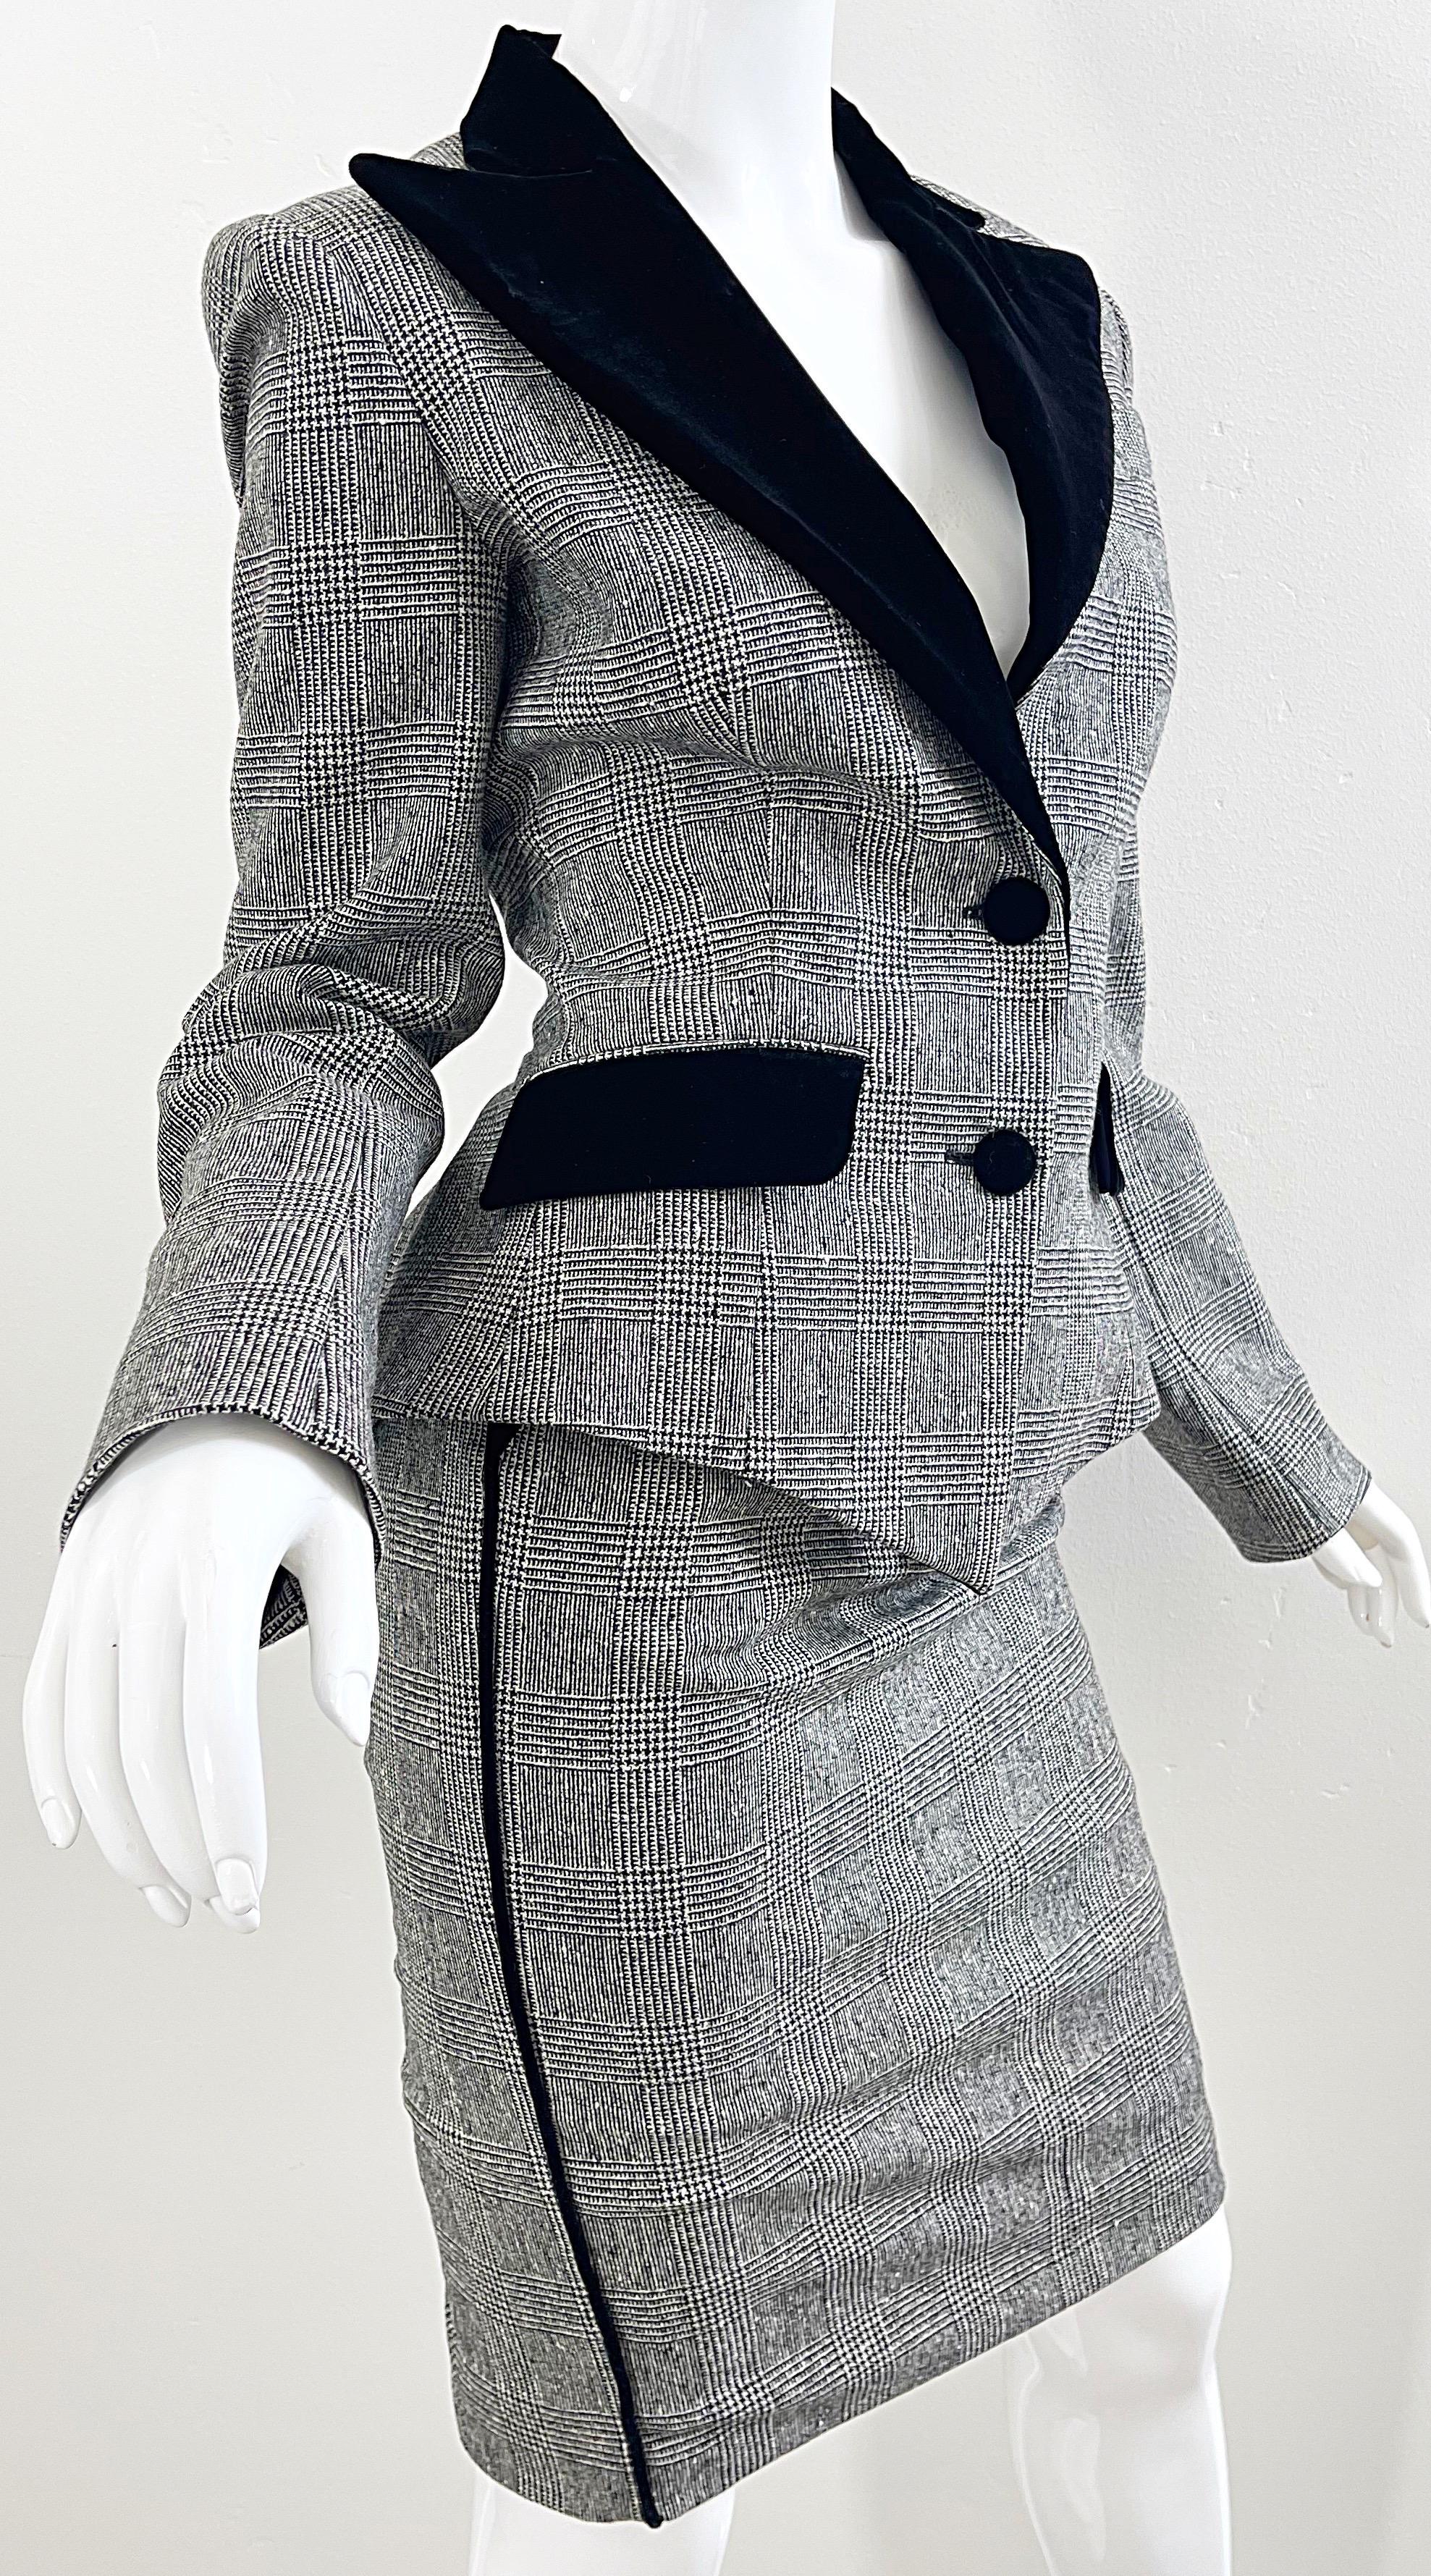 New Roberto Cavalli 2000s Size 42 / 8 Black and White Plaid Skirt Suit Y2K For Sale 4